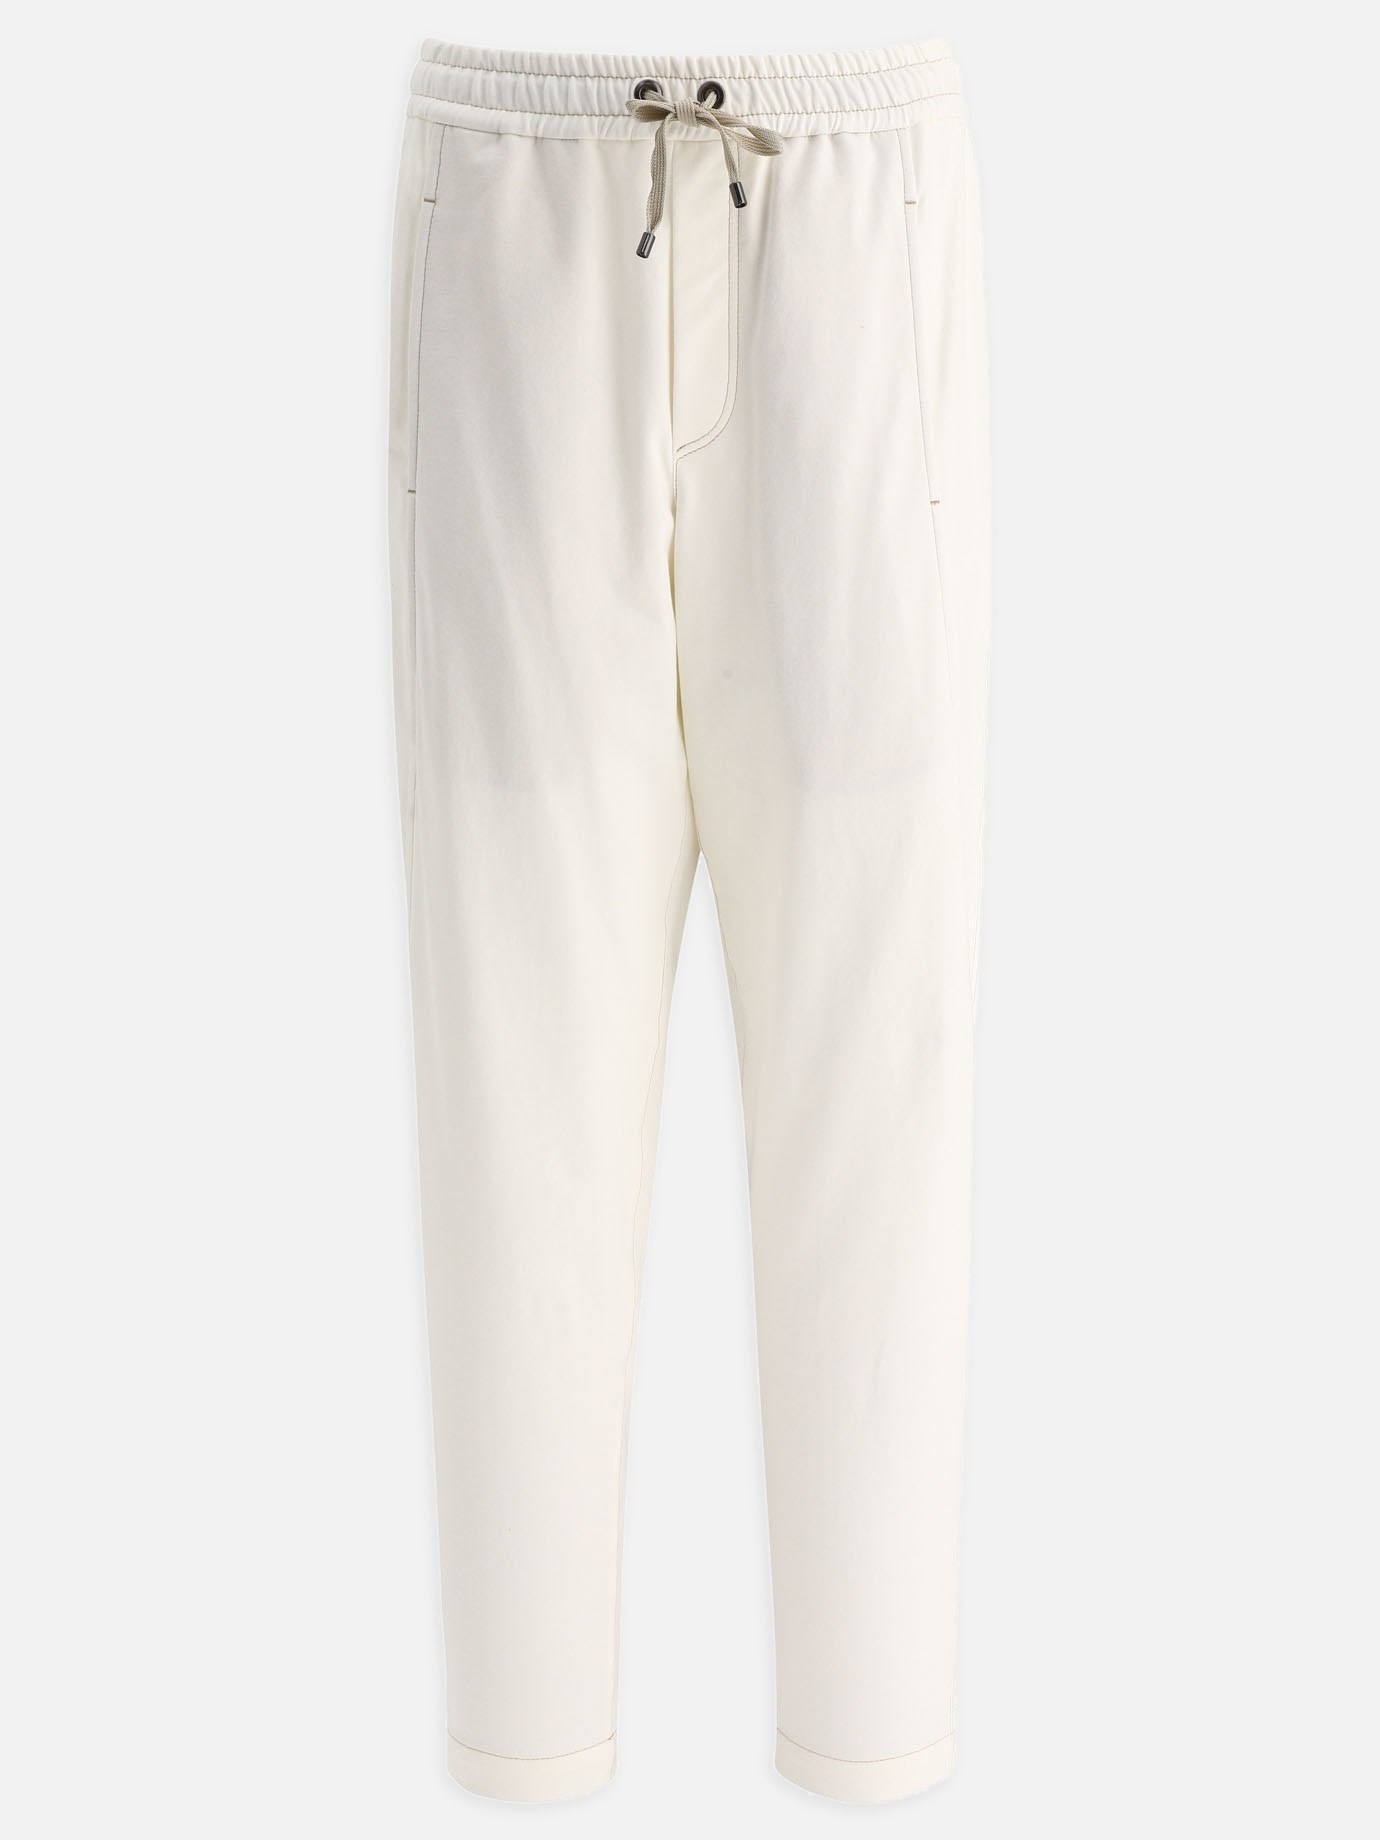 Drawstring trousers by Brunello Cucinelli